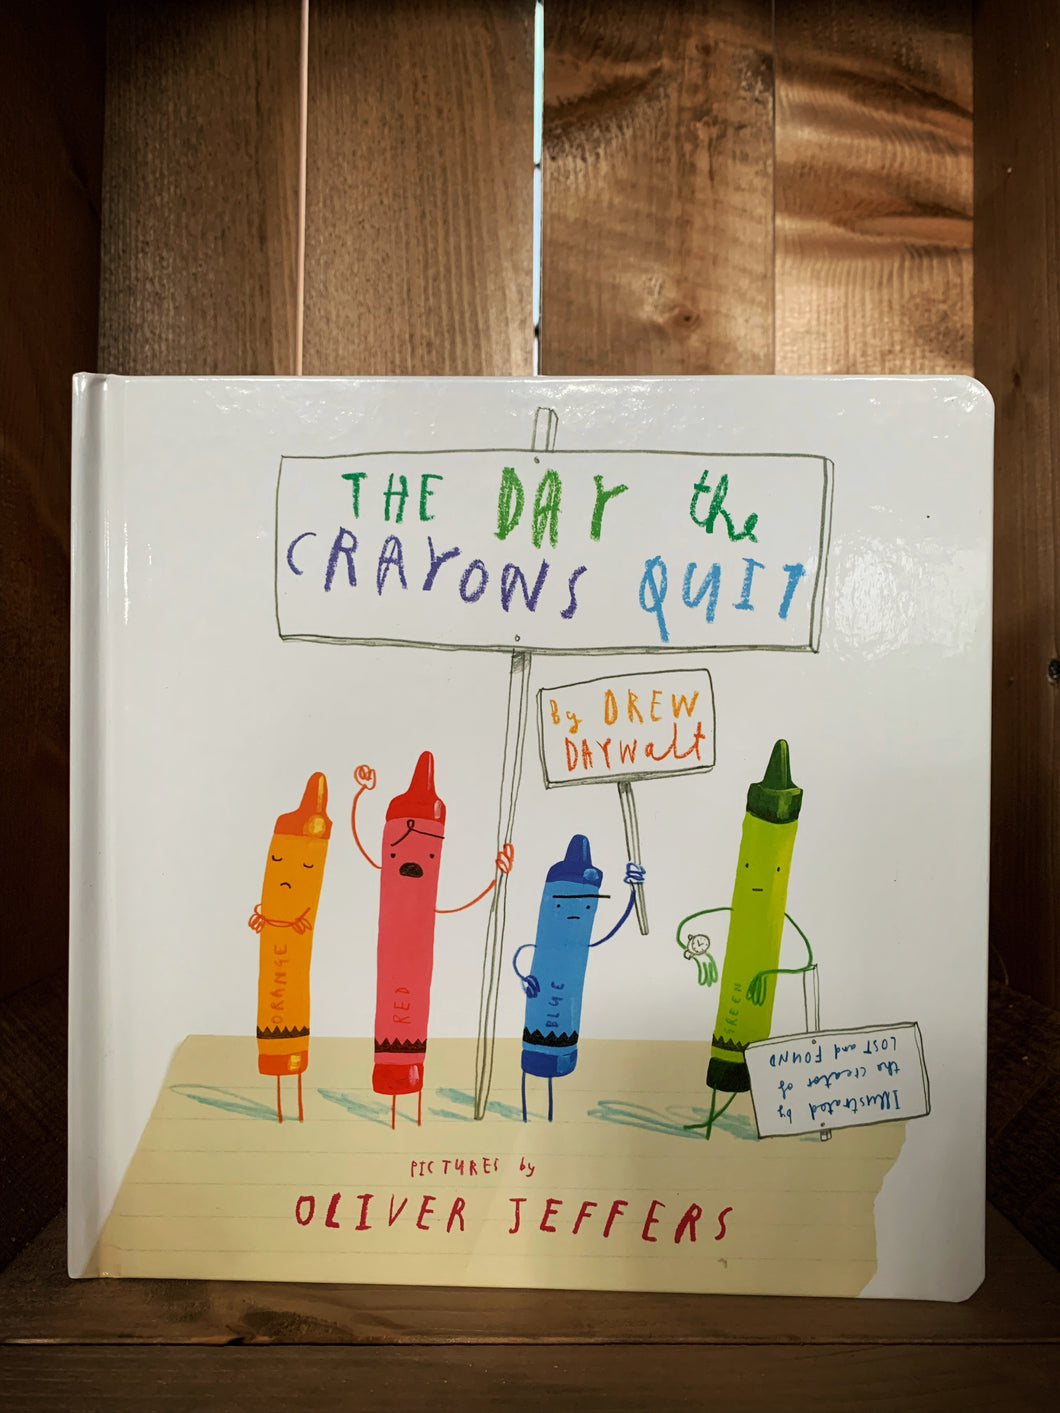 Image of the front cover of The Day the Crayons Quit. The cover has a plain white background, and features an illustration of 4 anthropomorphized crayons, orange, red, blue, and green, holding protest signs. The title is written as if with crayons on a sign, which is being held by the red crayon.